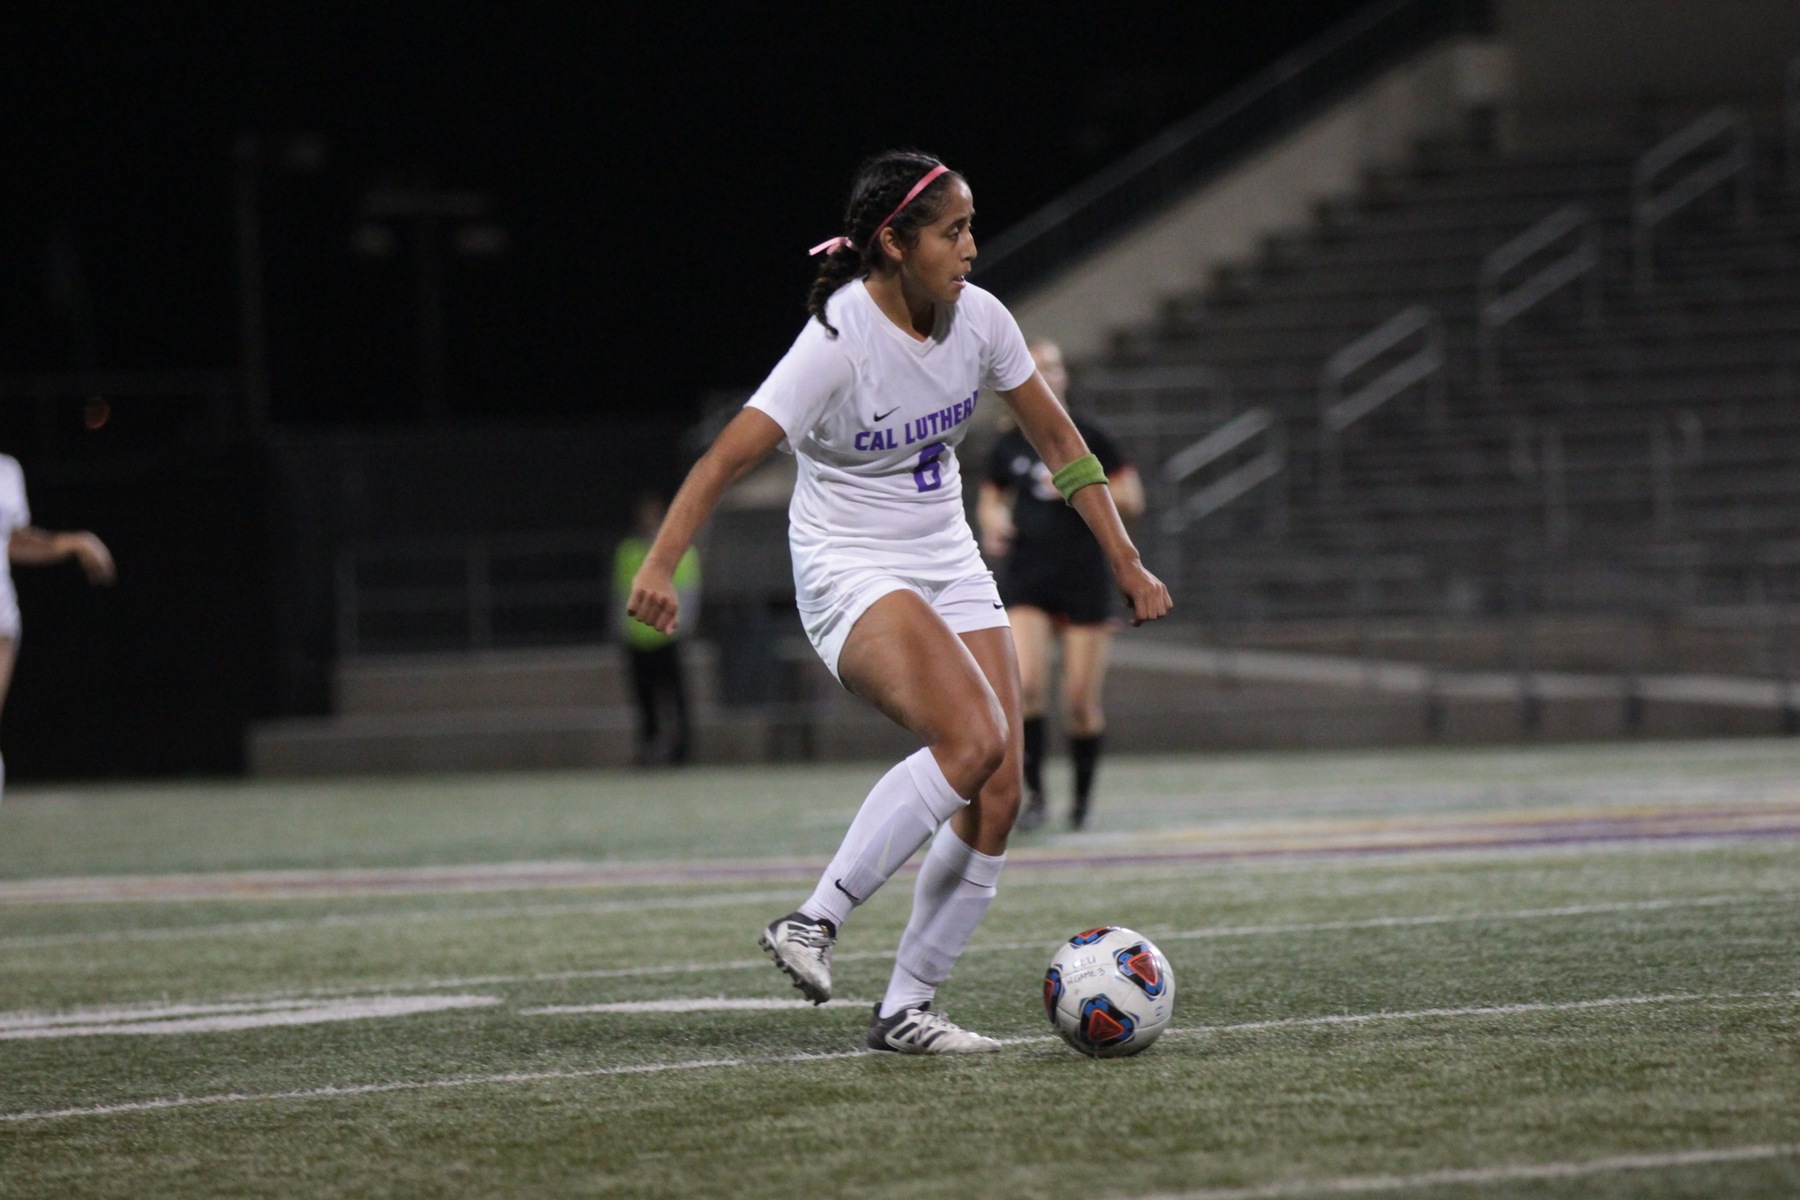 Trinity Martinez and the Cal Lutheran defense shut out No. 11 Hardin-Simmons.